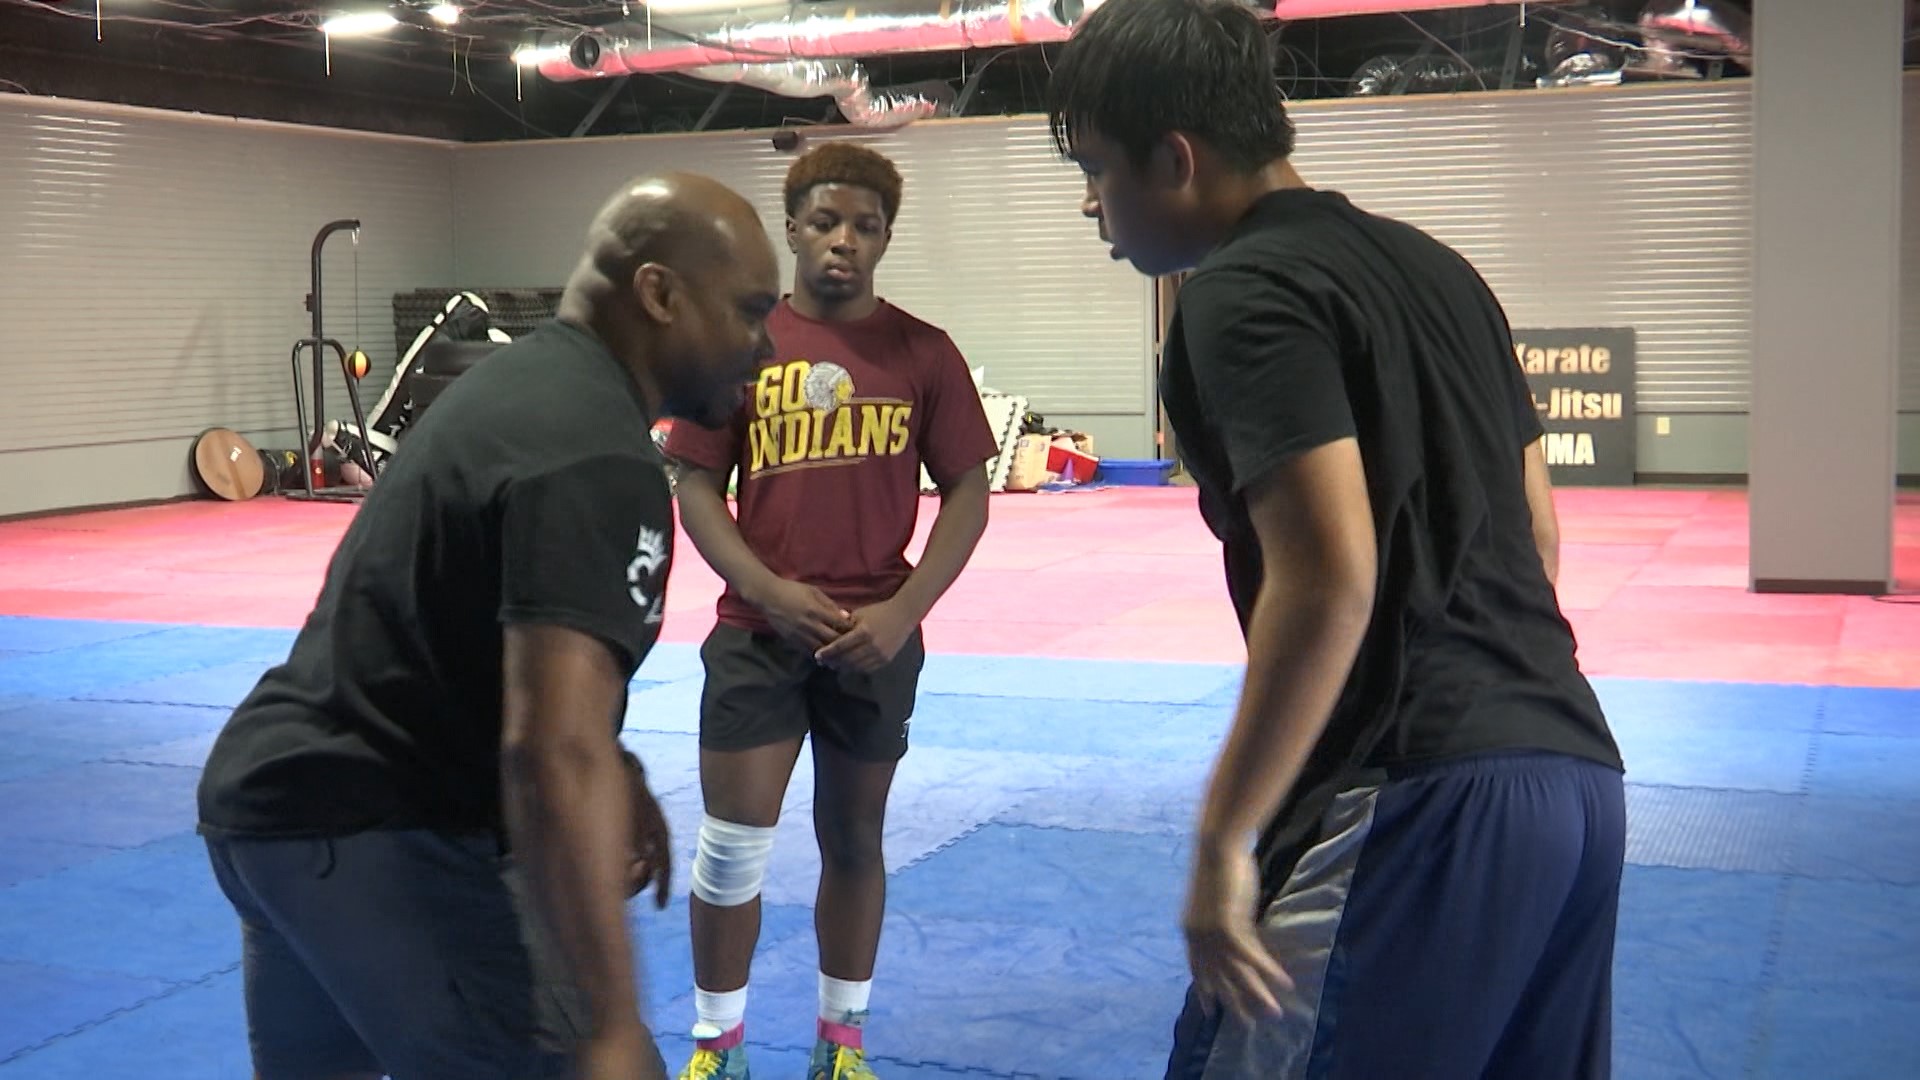 Coach Jason Guyton hopes that his third wrestling academy remains as a consistent resource for the community and a epicenter for the wrestlers of the future.